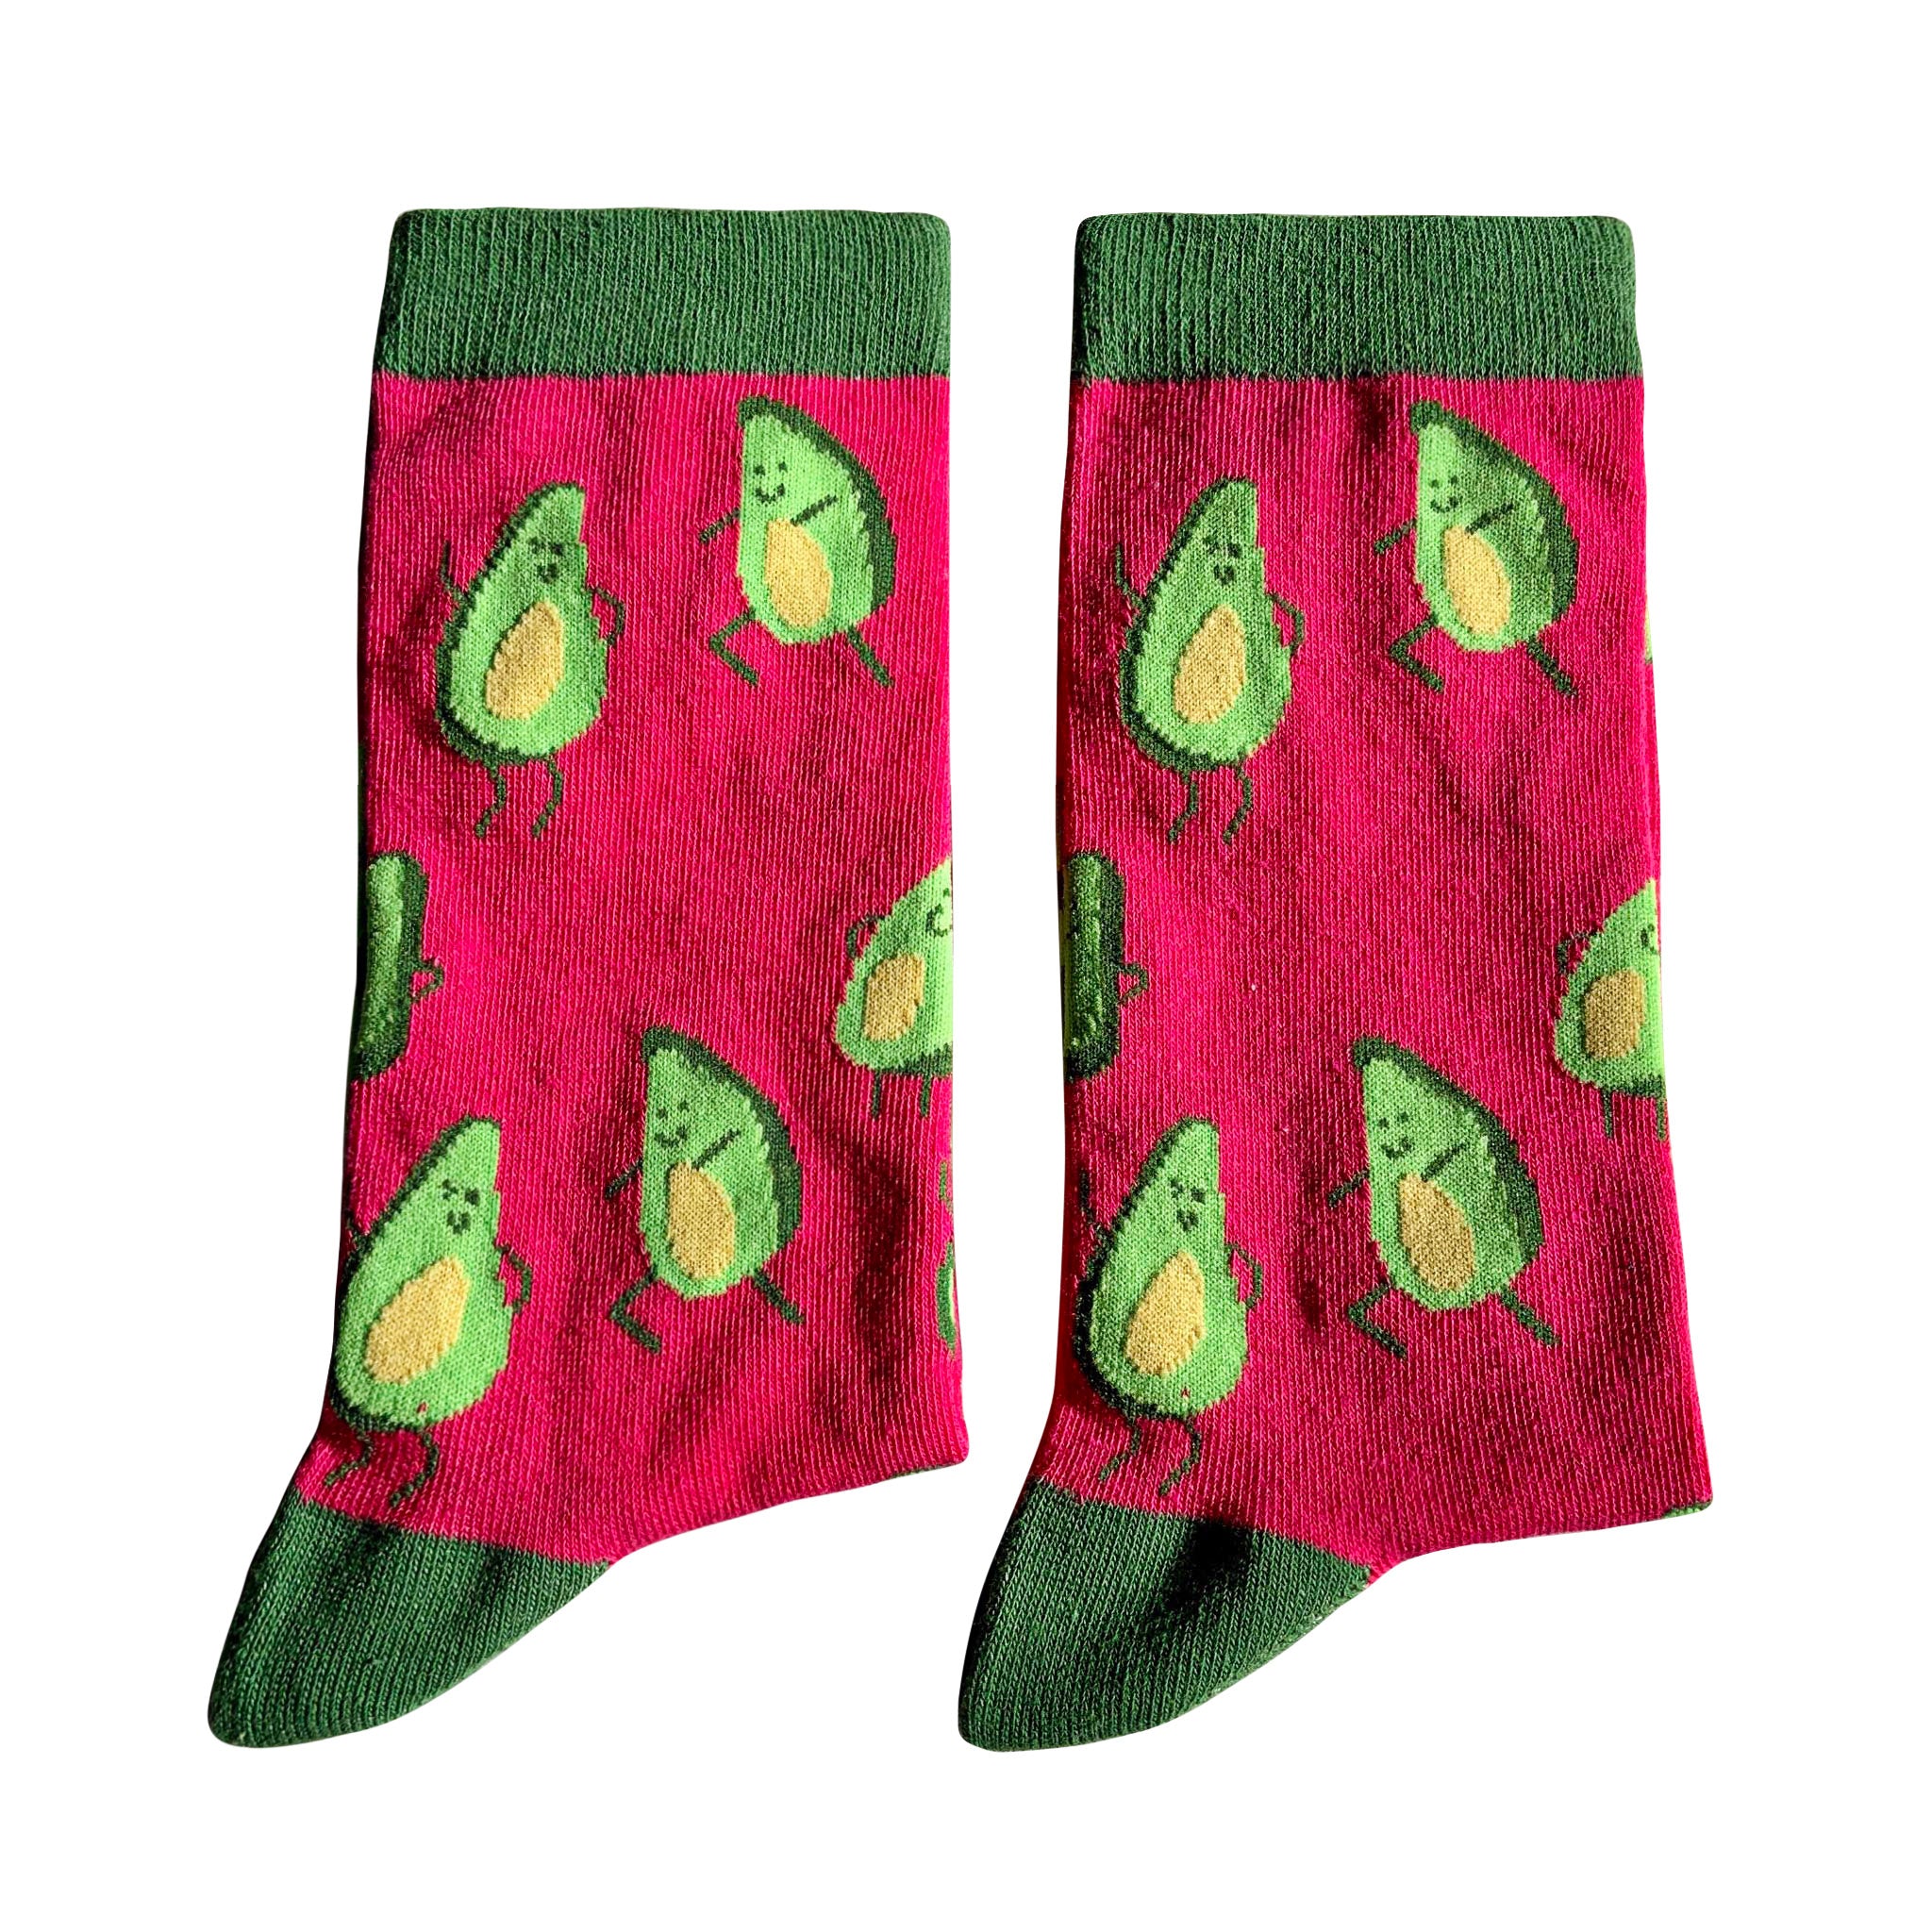 Avocado socks available in all sizes Jolly Soles